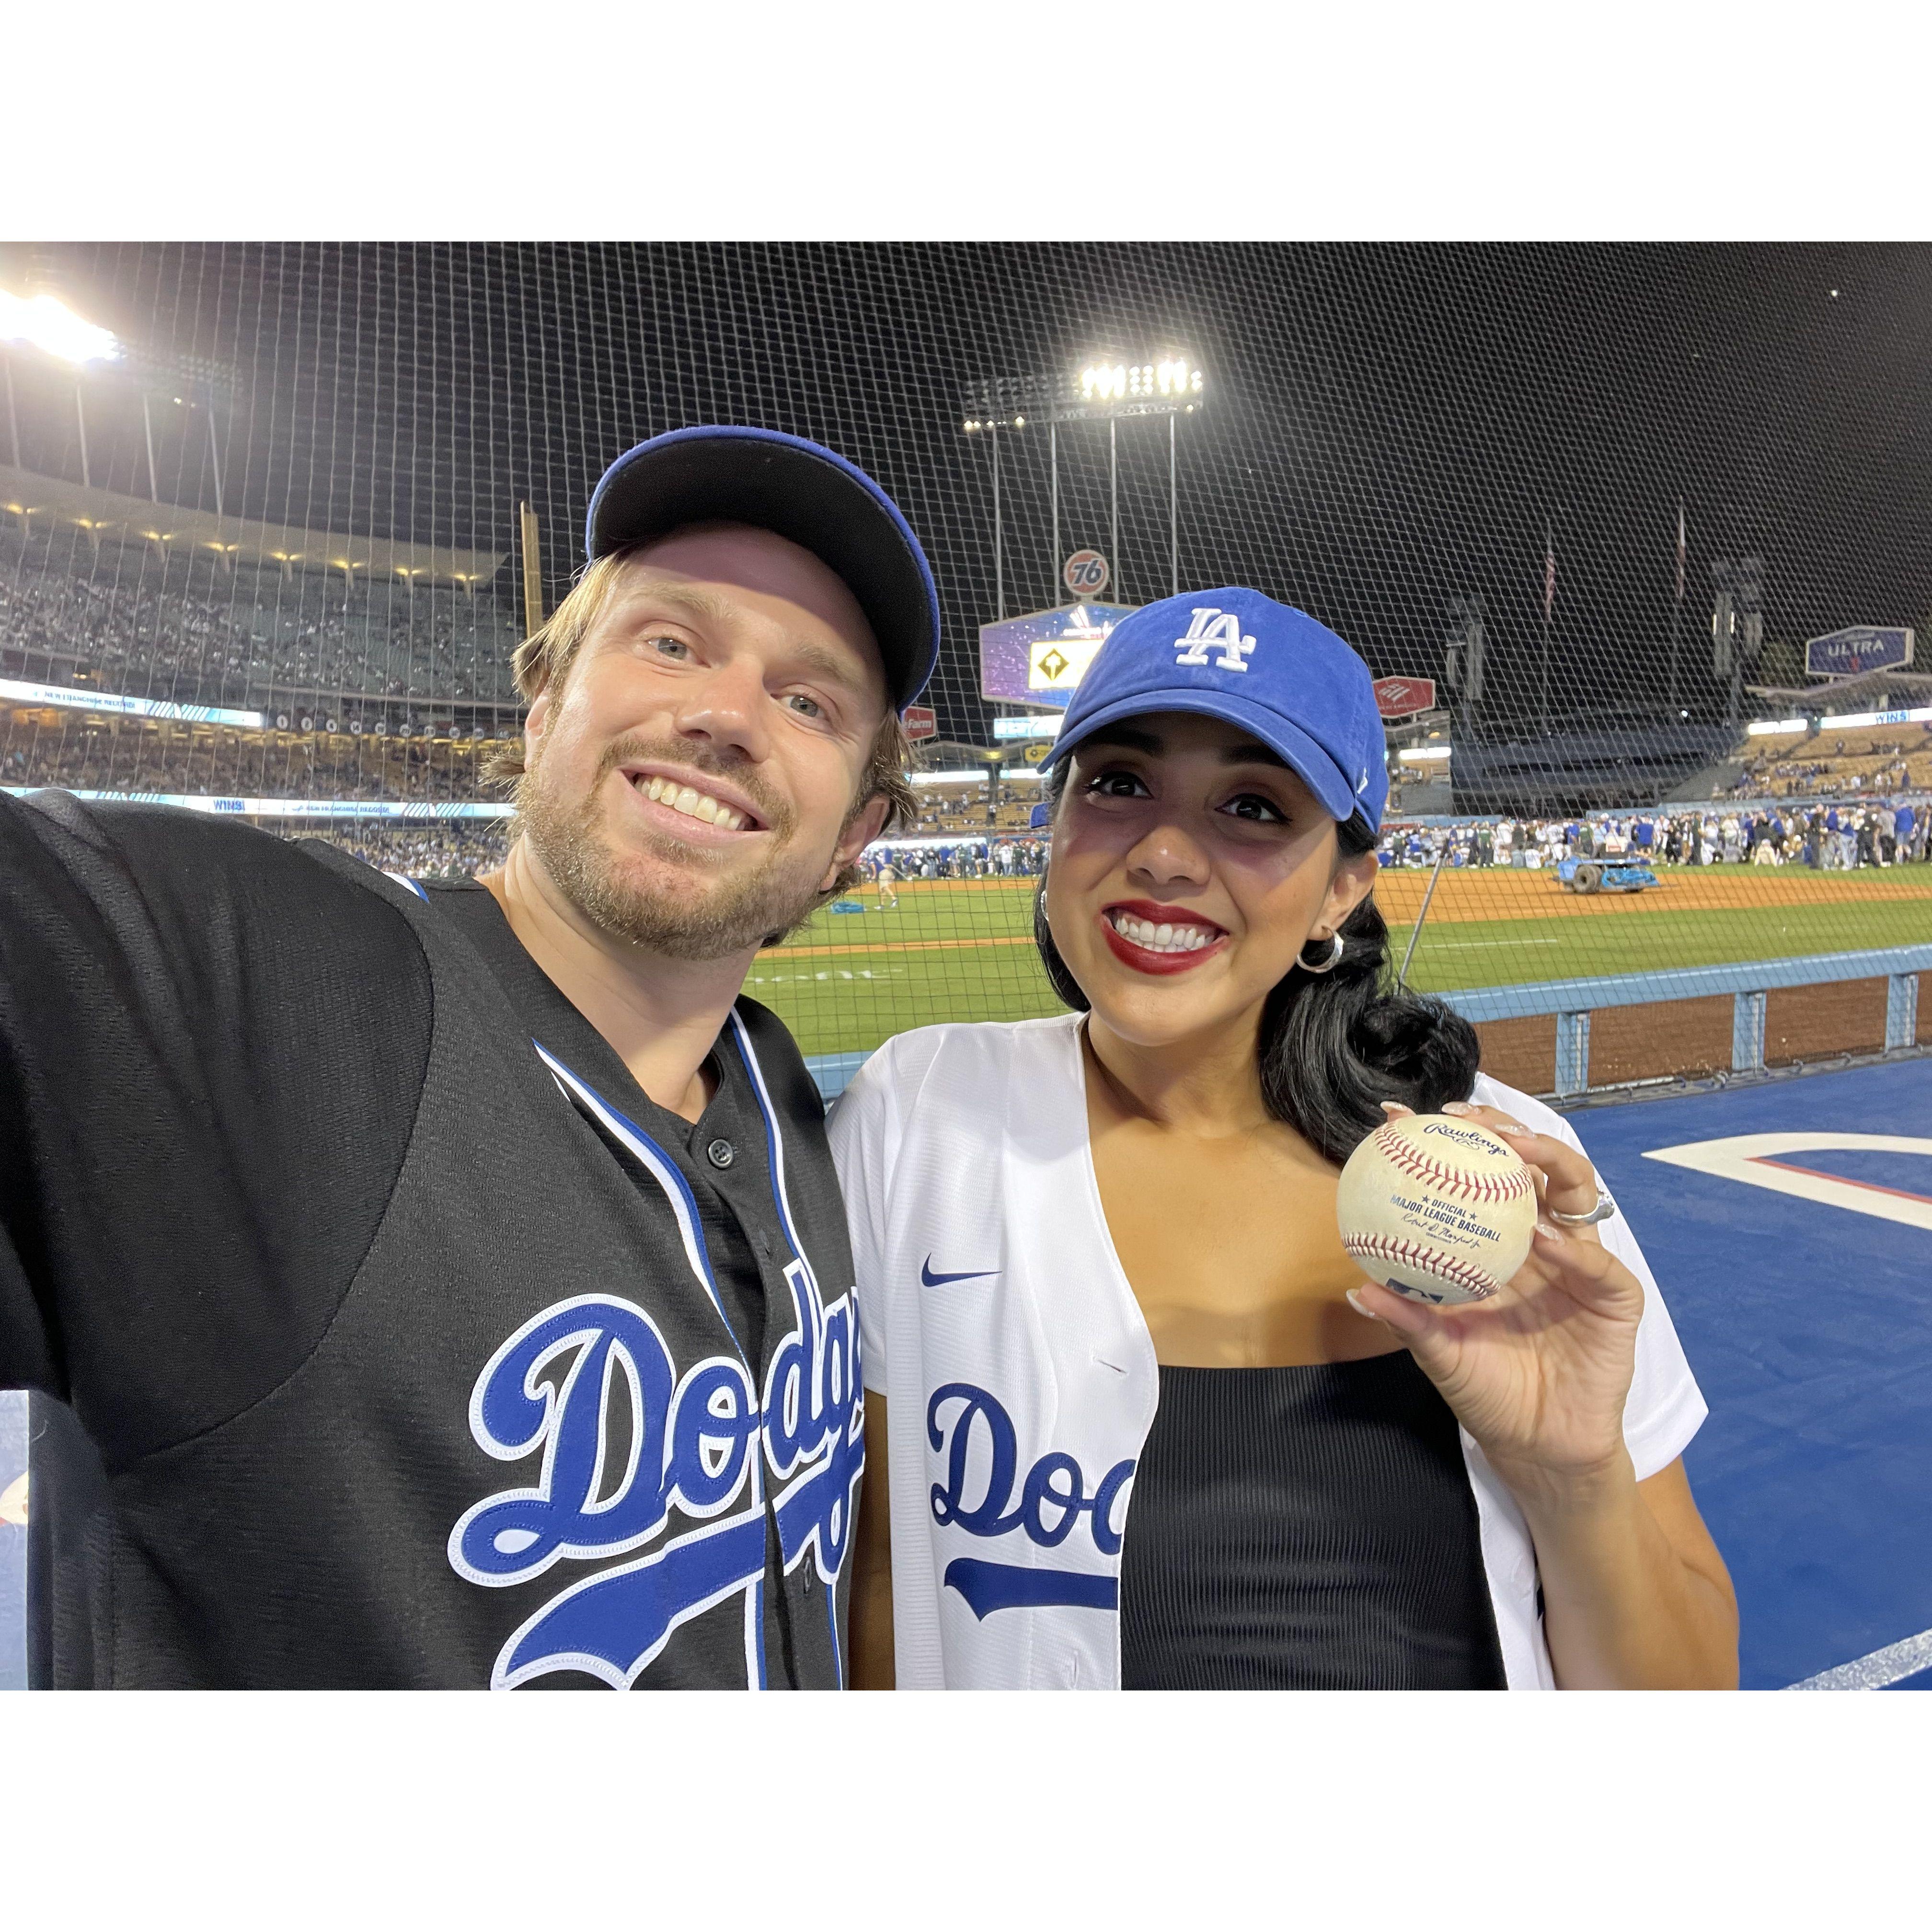 Go Dodgers! Chrisy got a foul ball on one of their visits to the Dugout club,